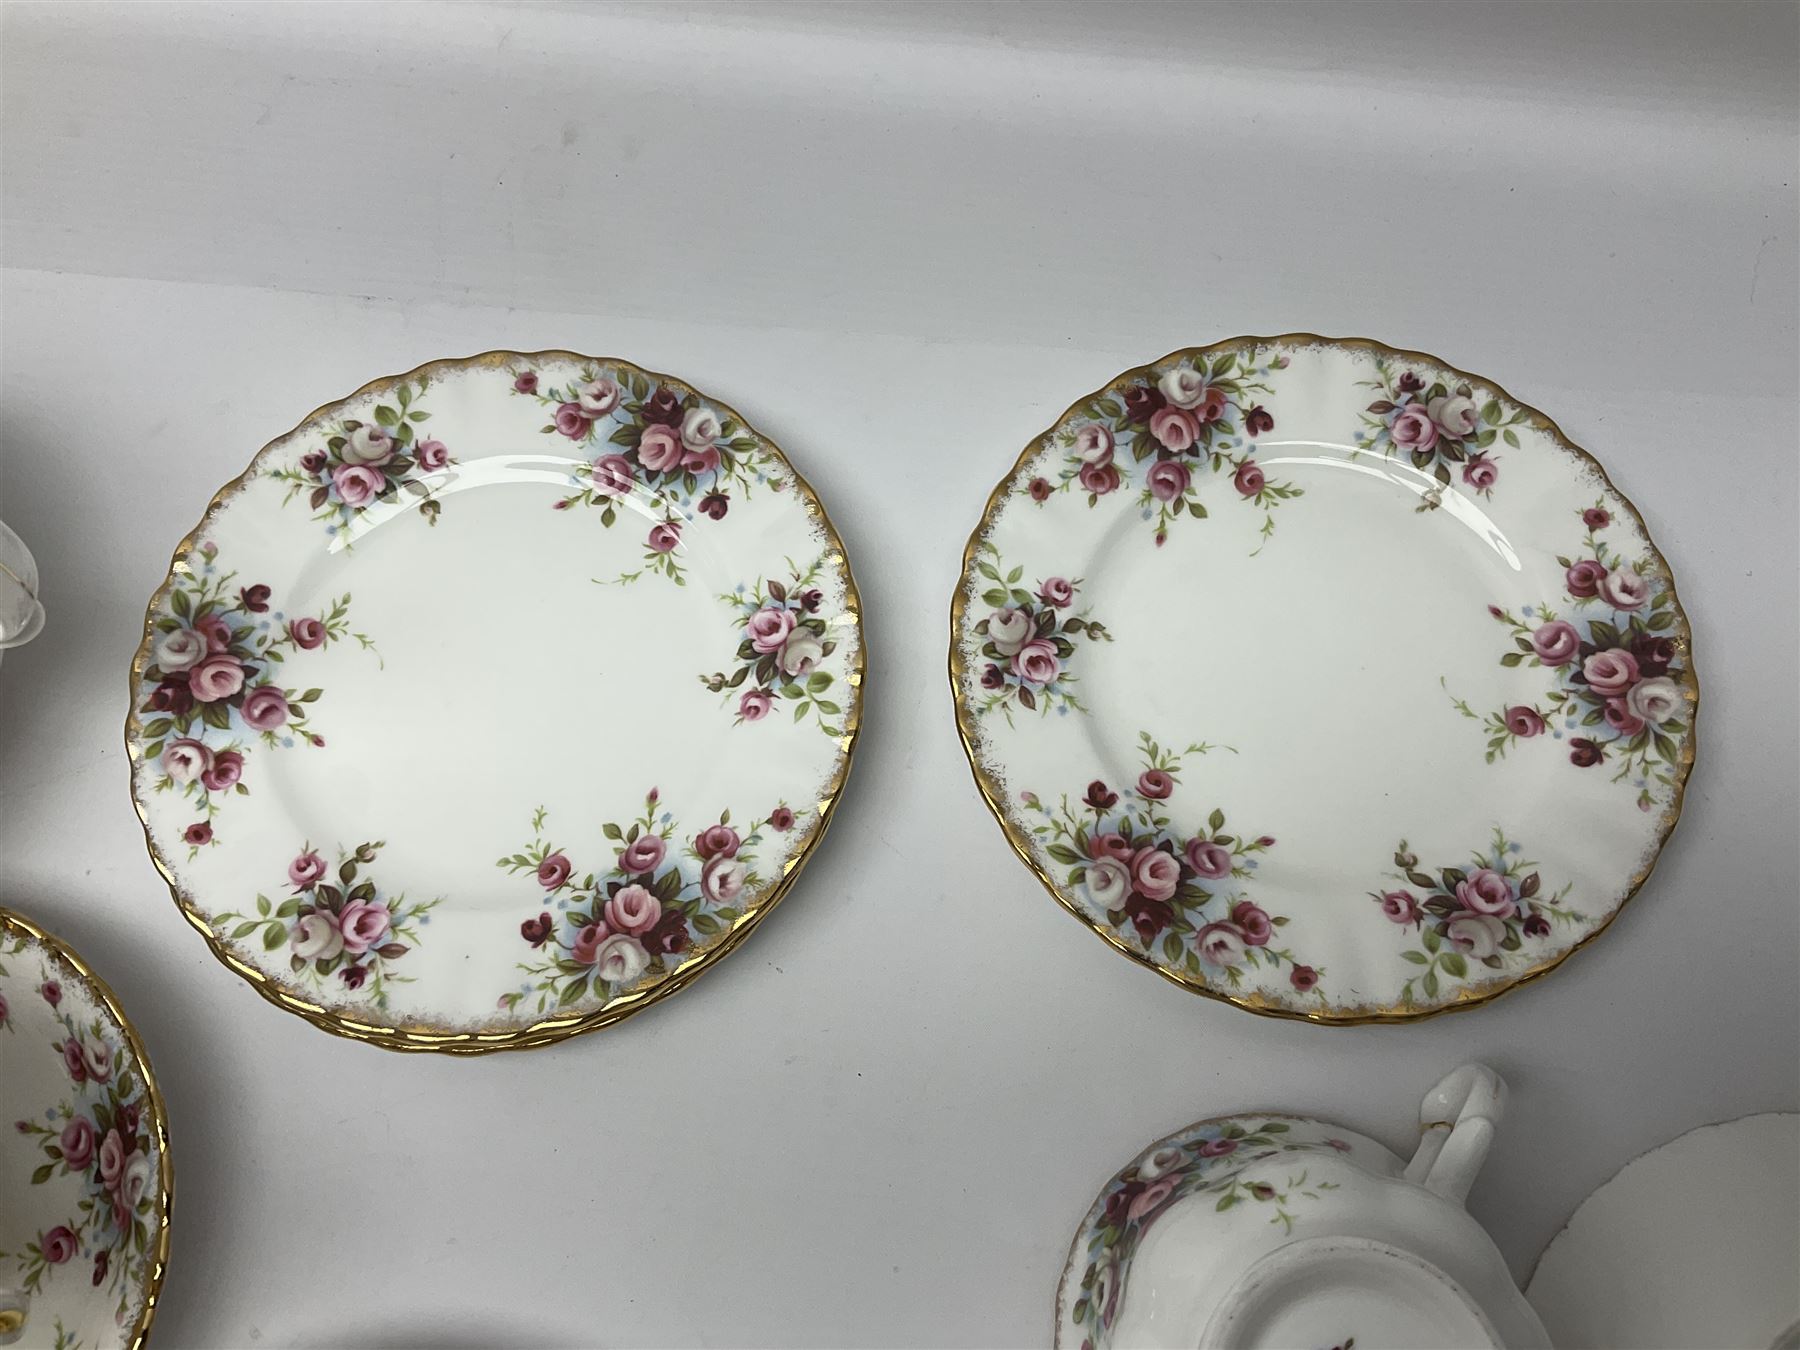 Royal Albert Cottage Garden pattern tea service for six people - Image 10 of 10